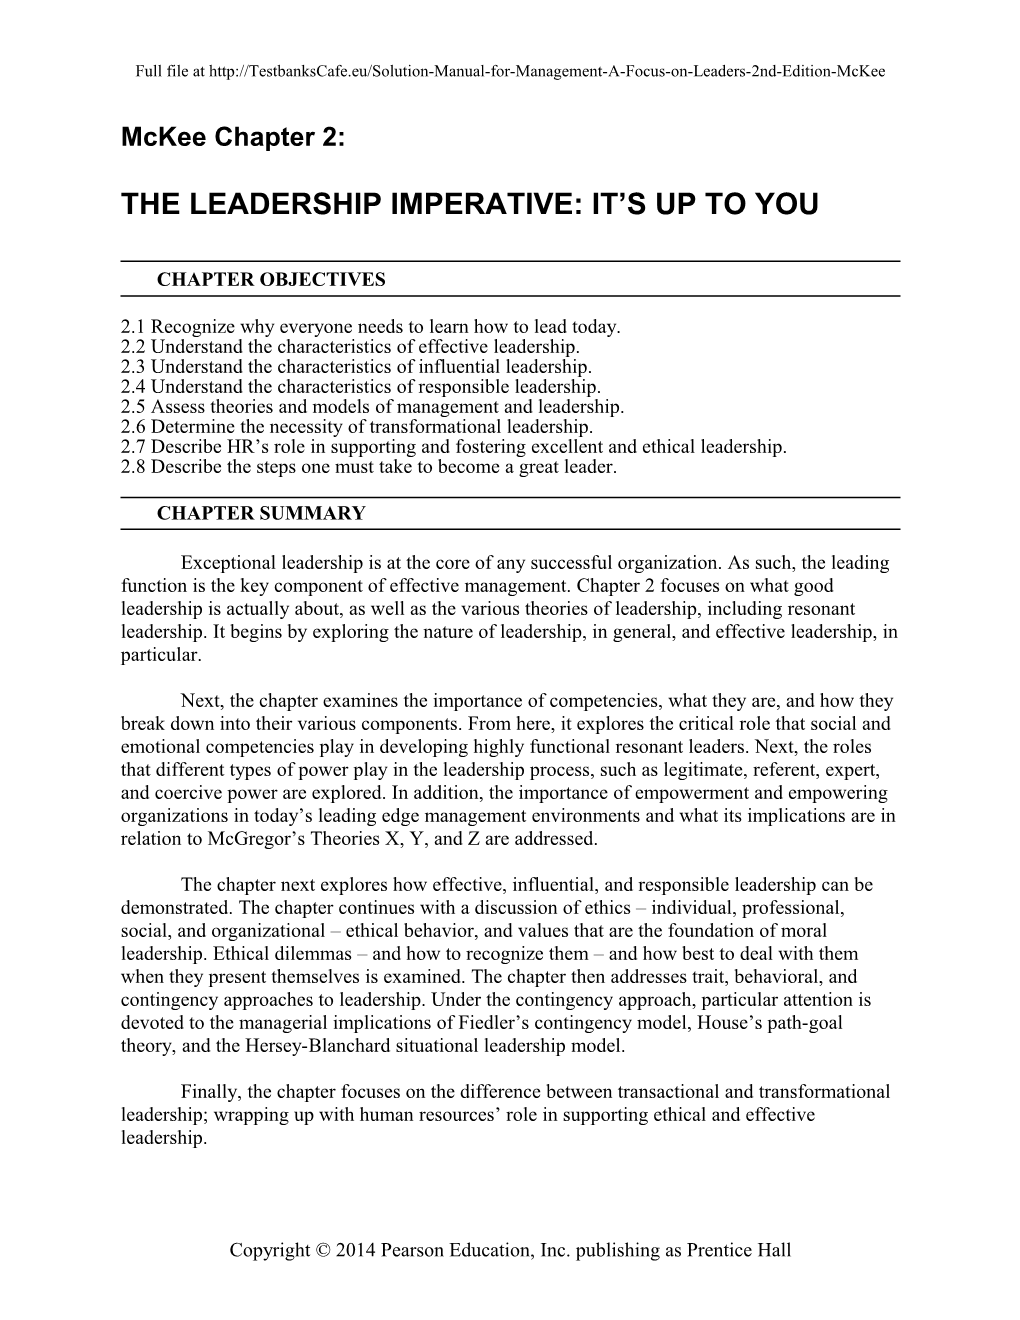 The Leadership Imperative: It S up to You